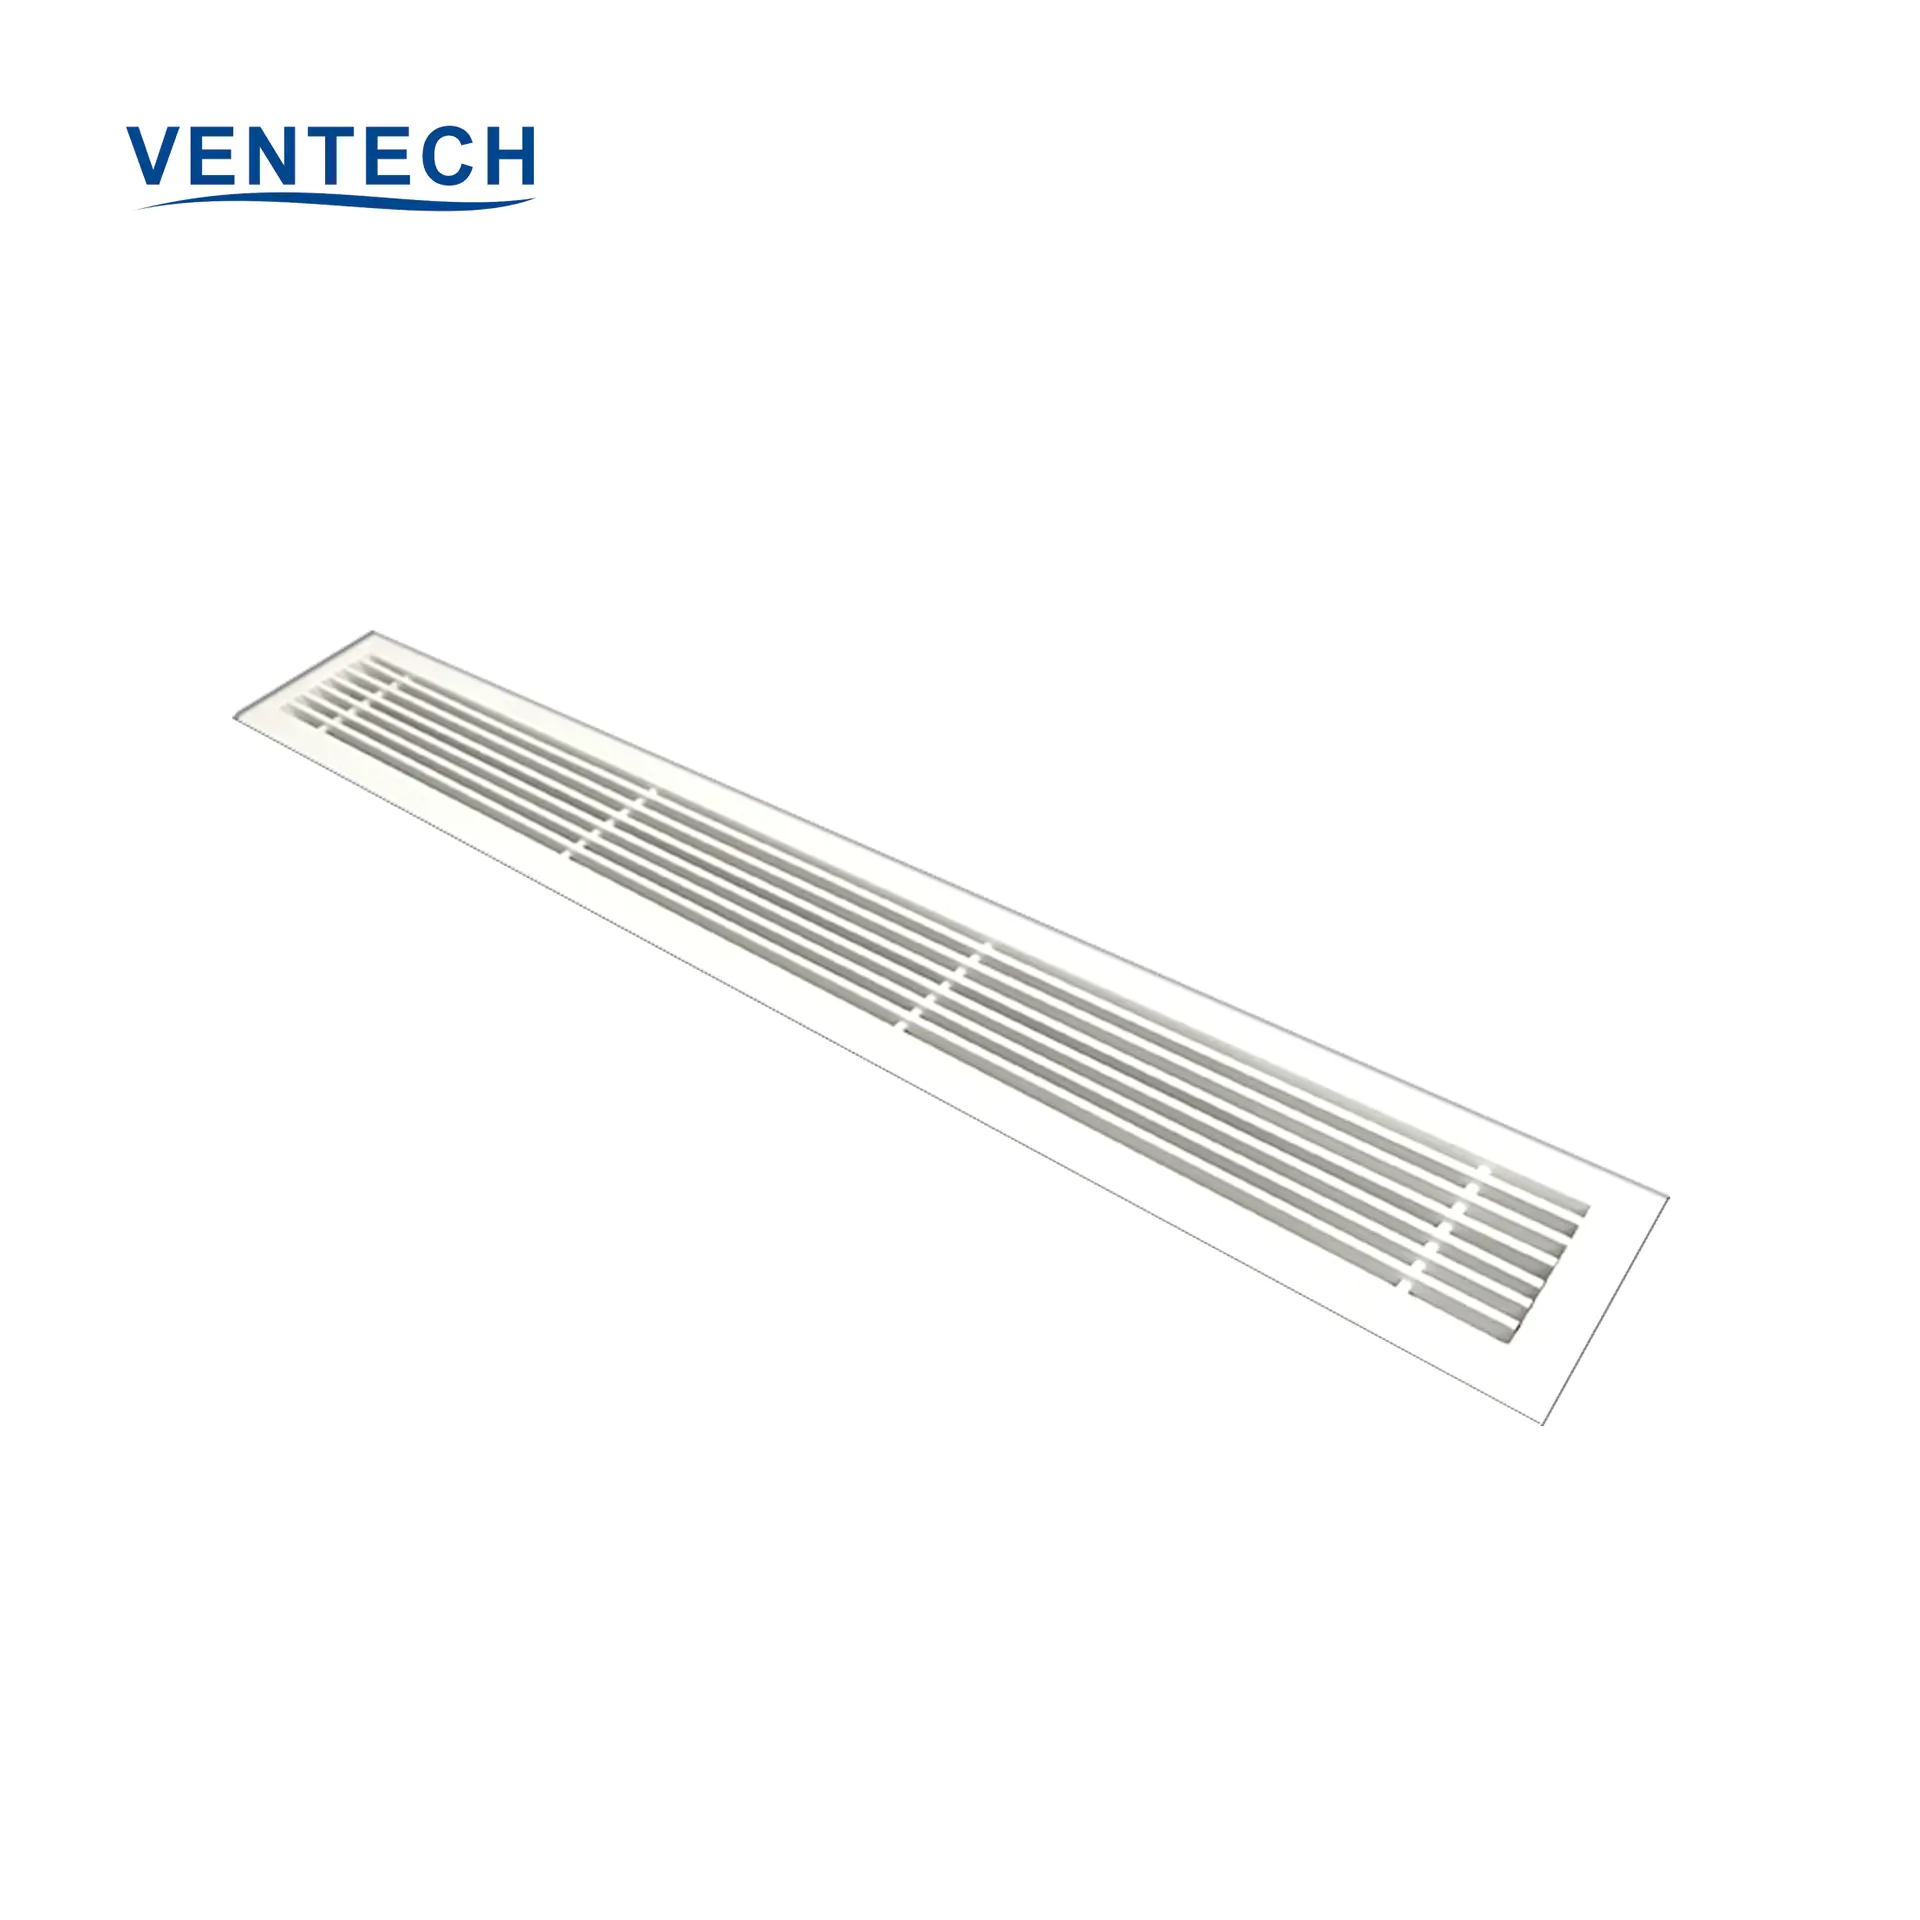 HVAC SYSTEM China Factory Department Aluminum Fresh Air Linear Bar Grille for Ventilation